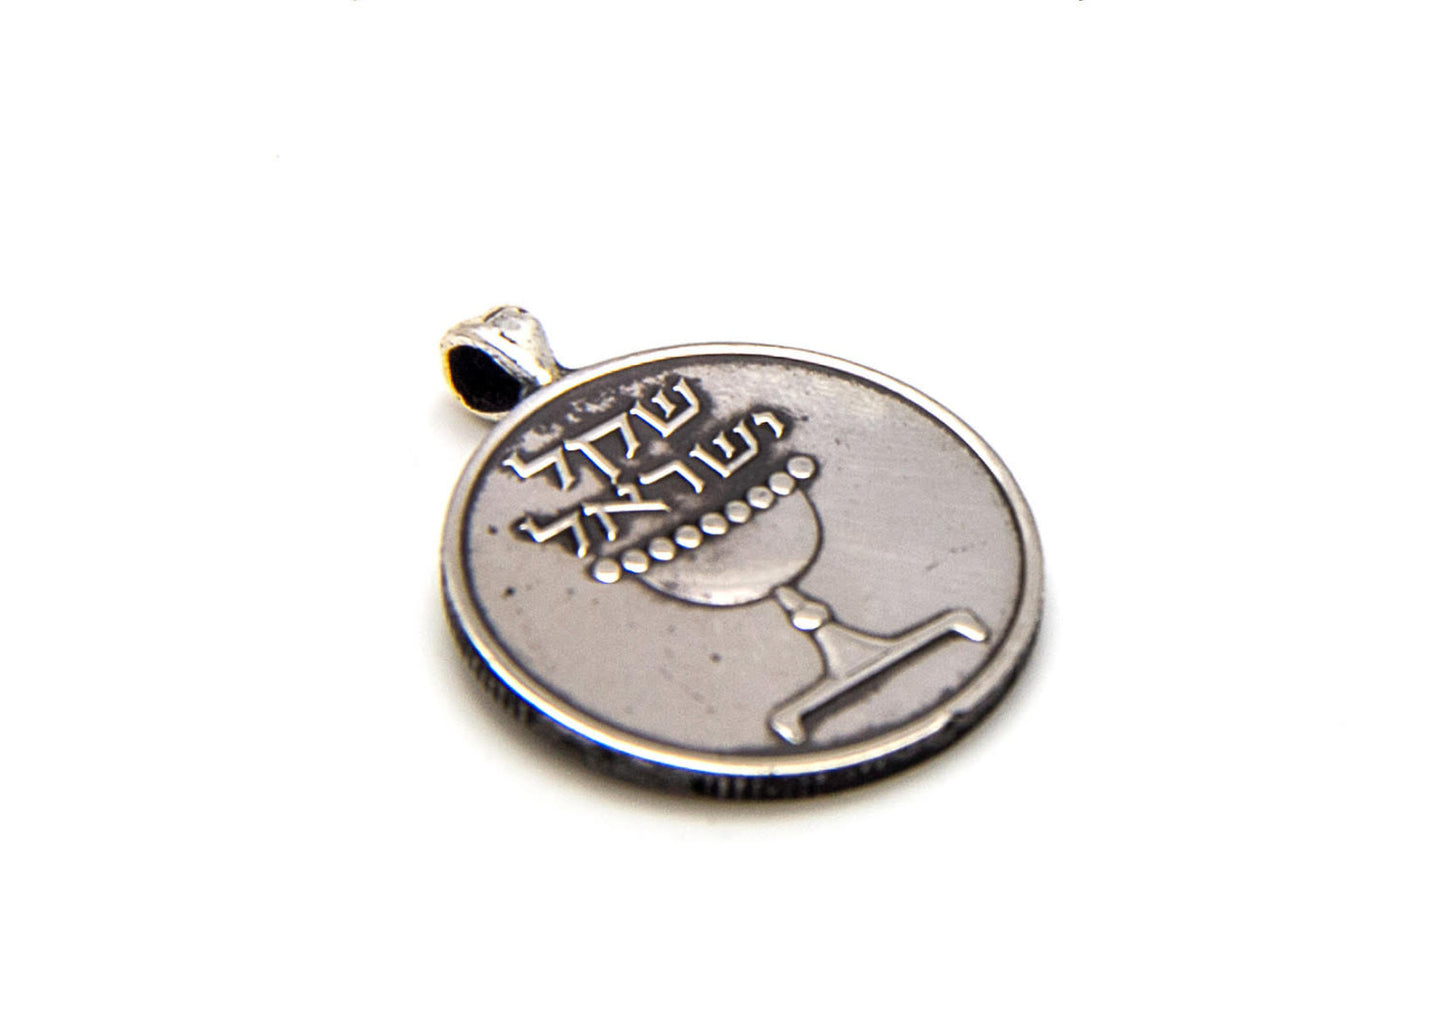 Old Israeli 1 Sheqel Coin Pendant Necklace